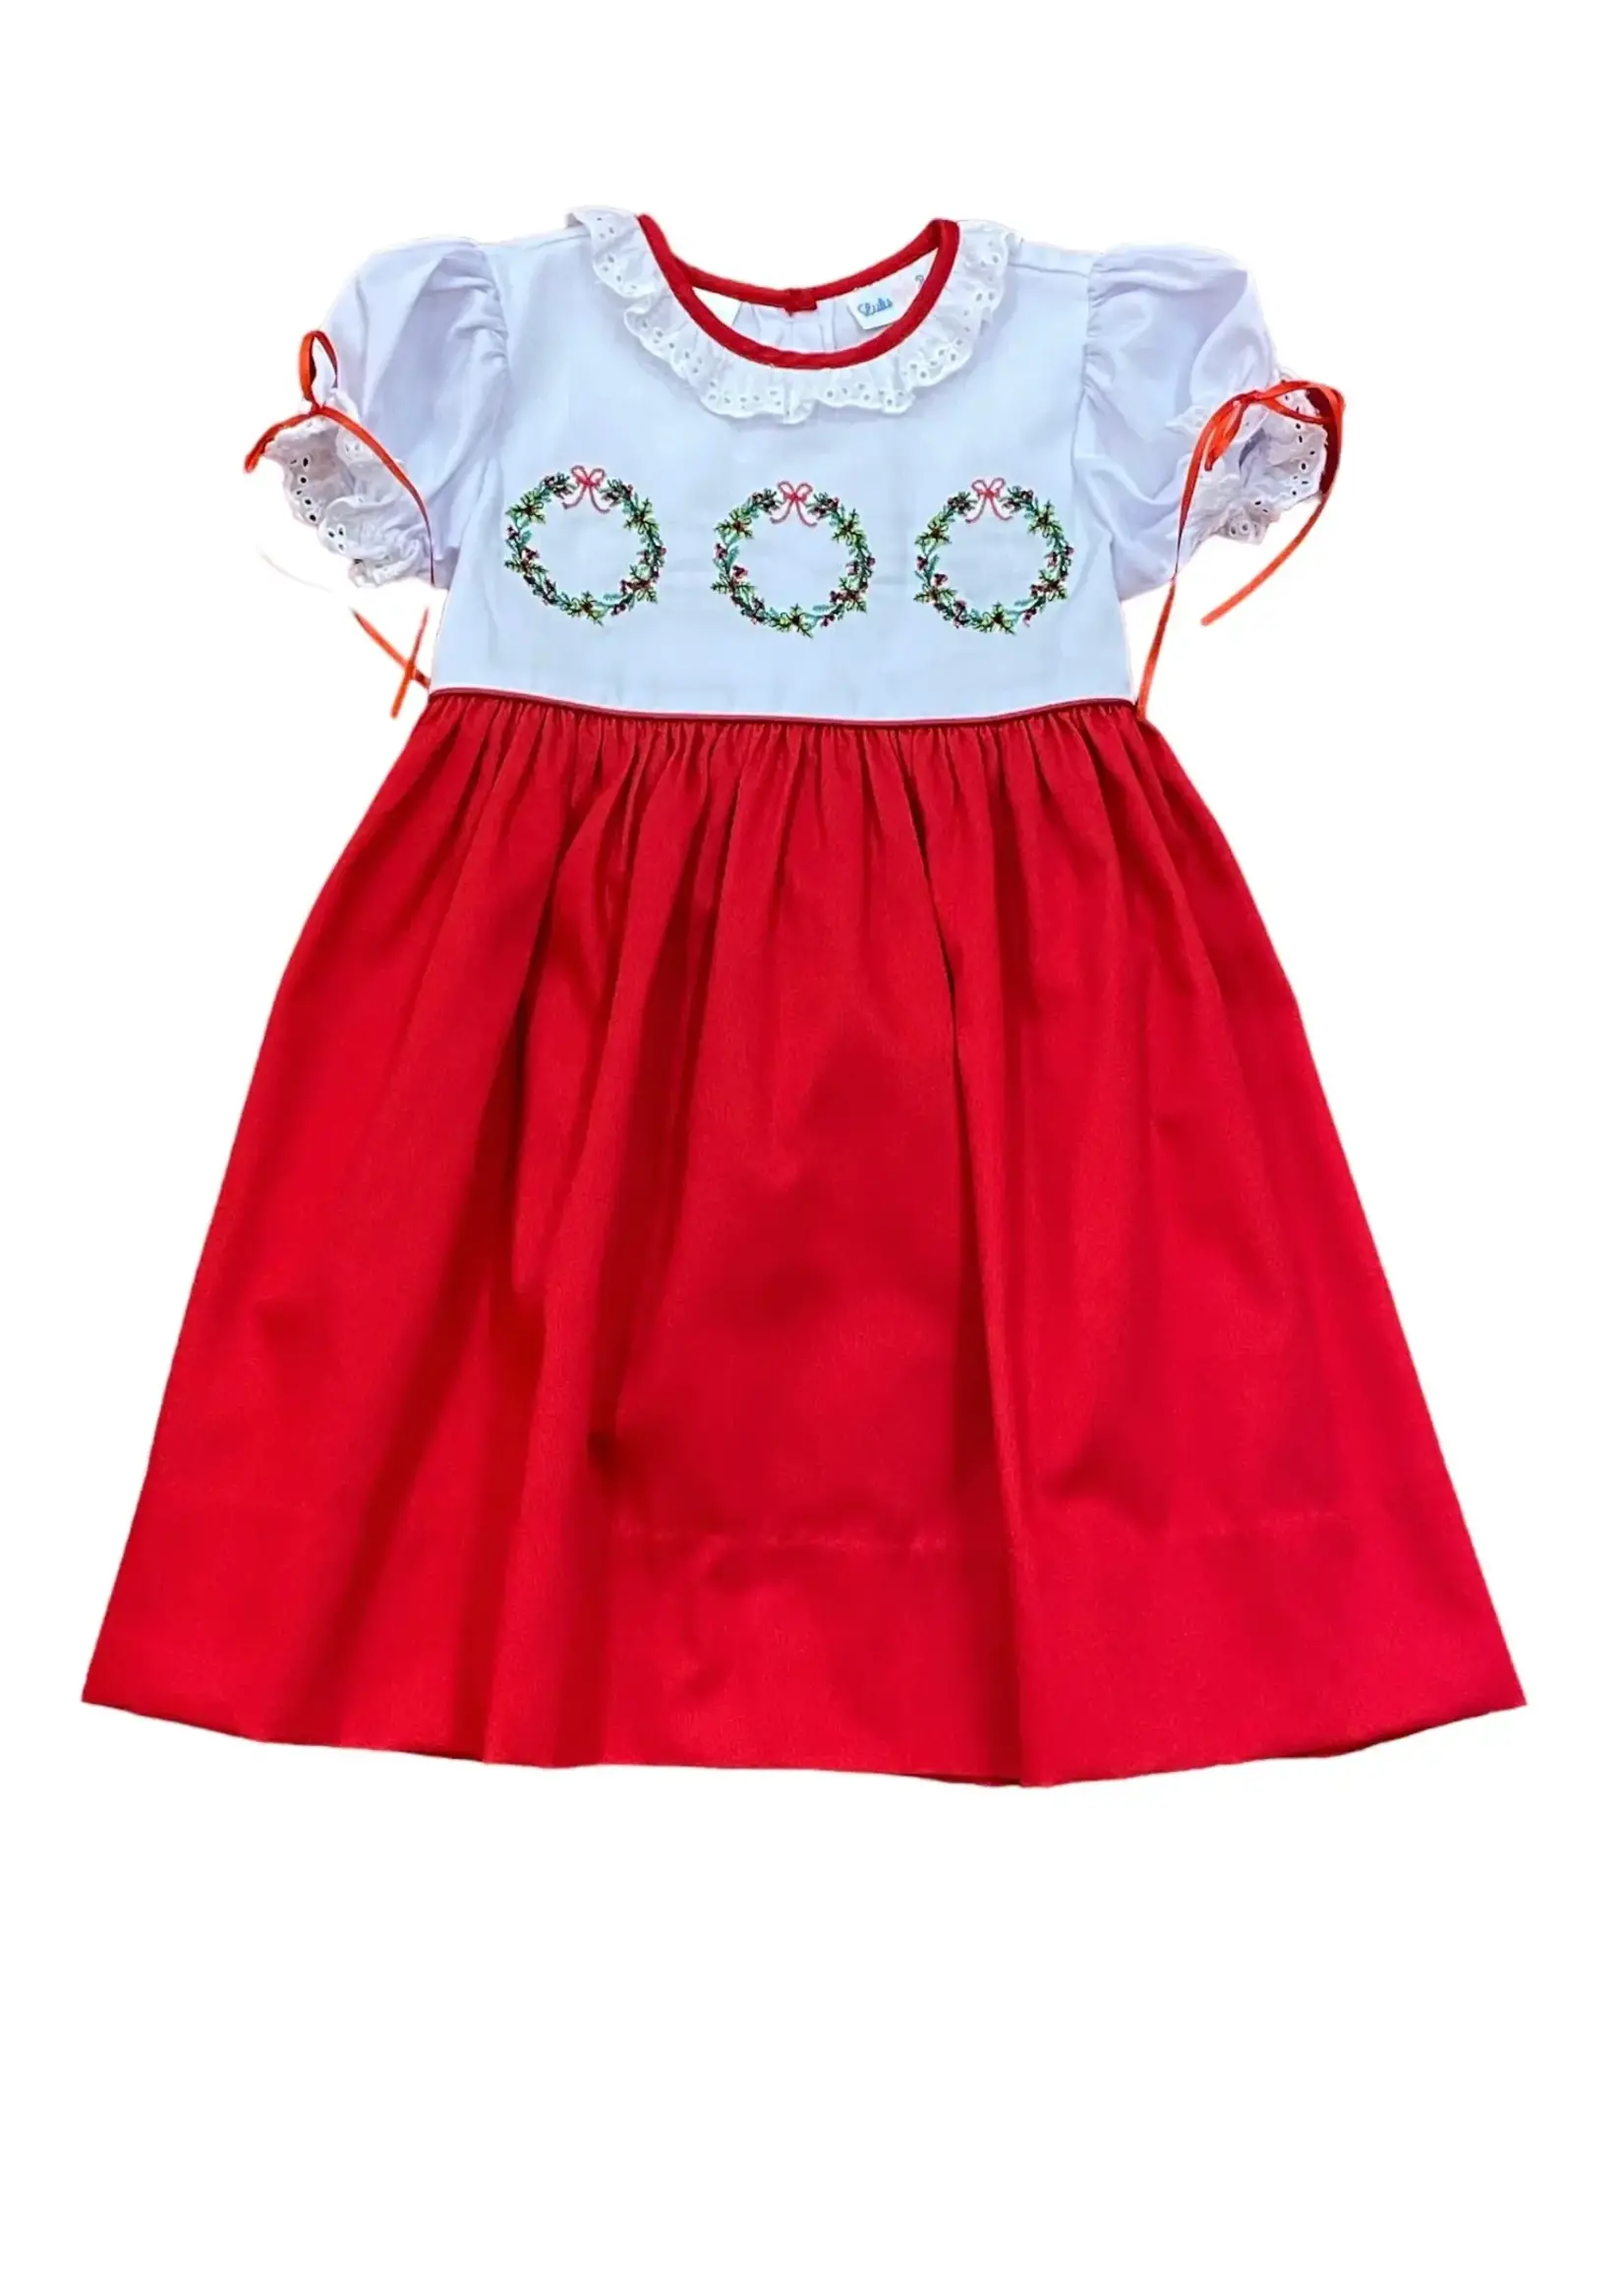 LuLu BeBe Red/White Wreath Embroidered Dress w/ Lace